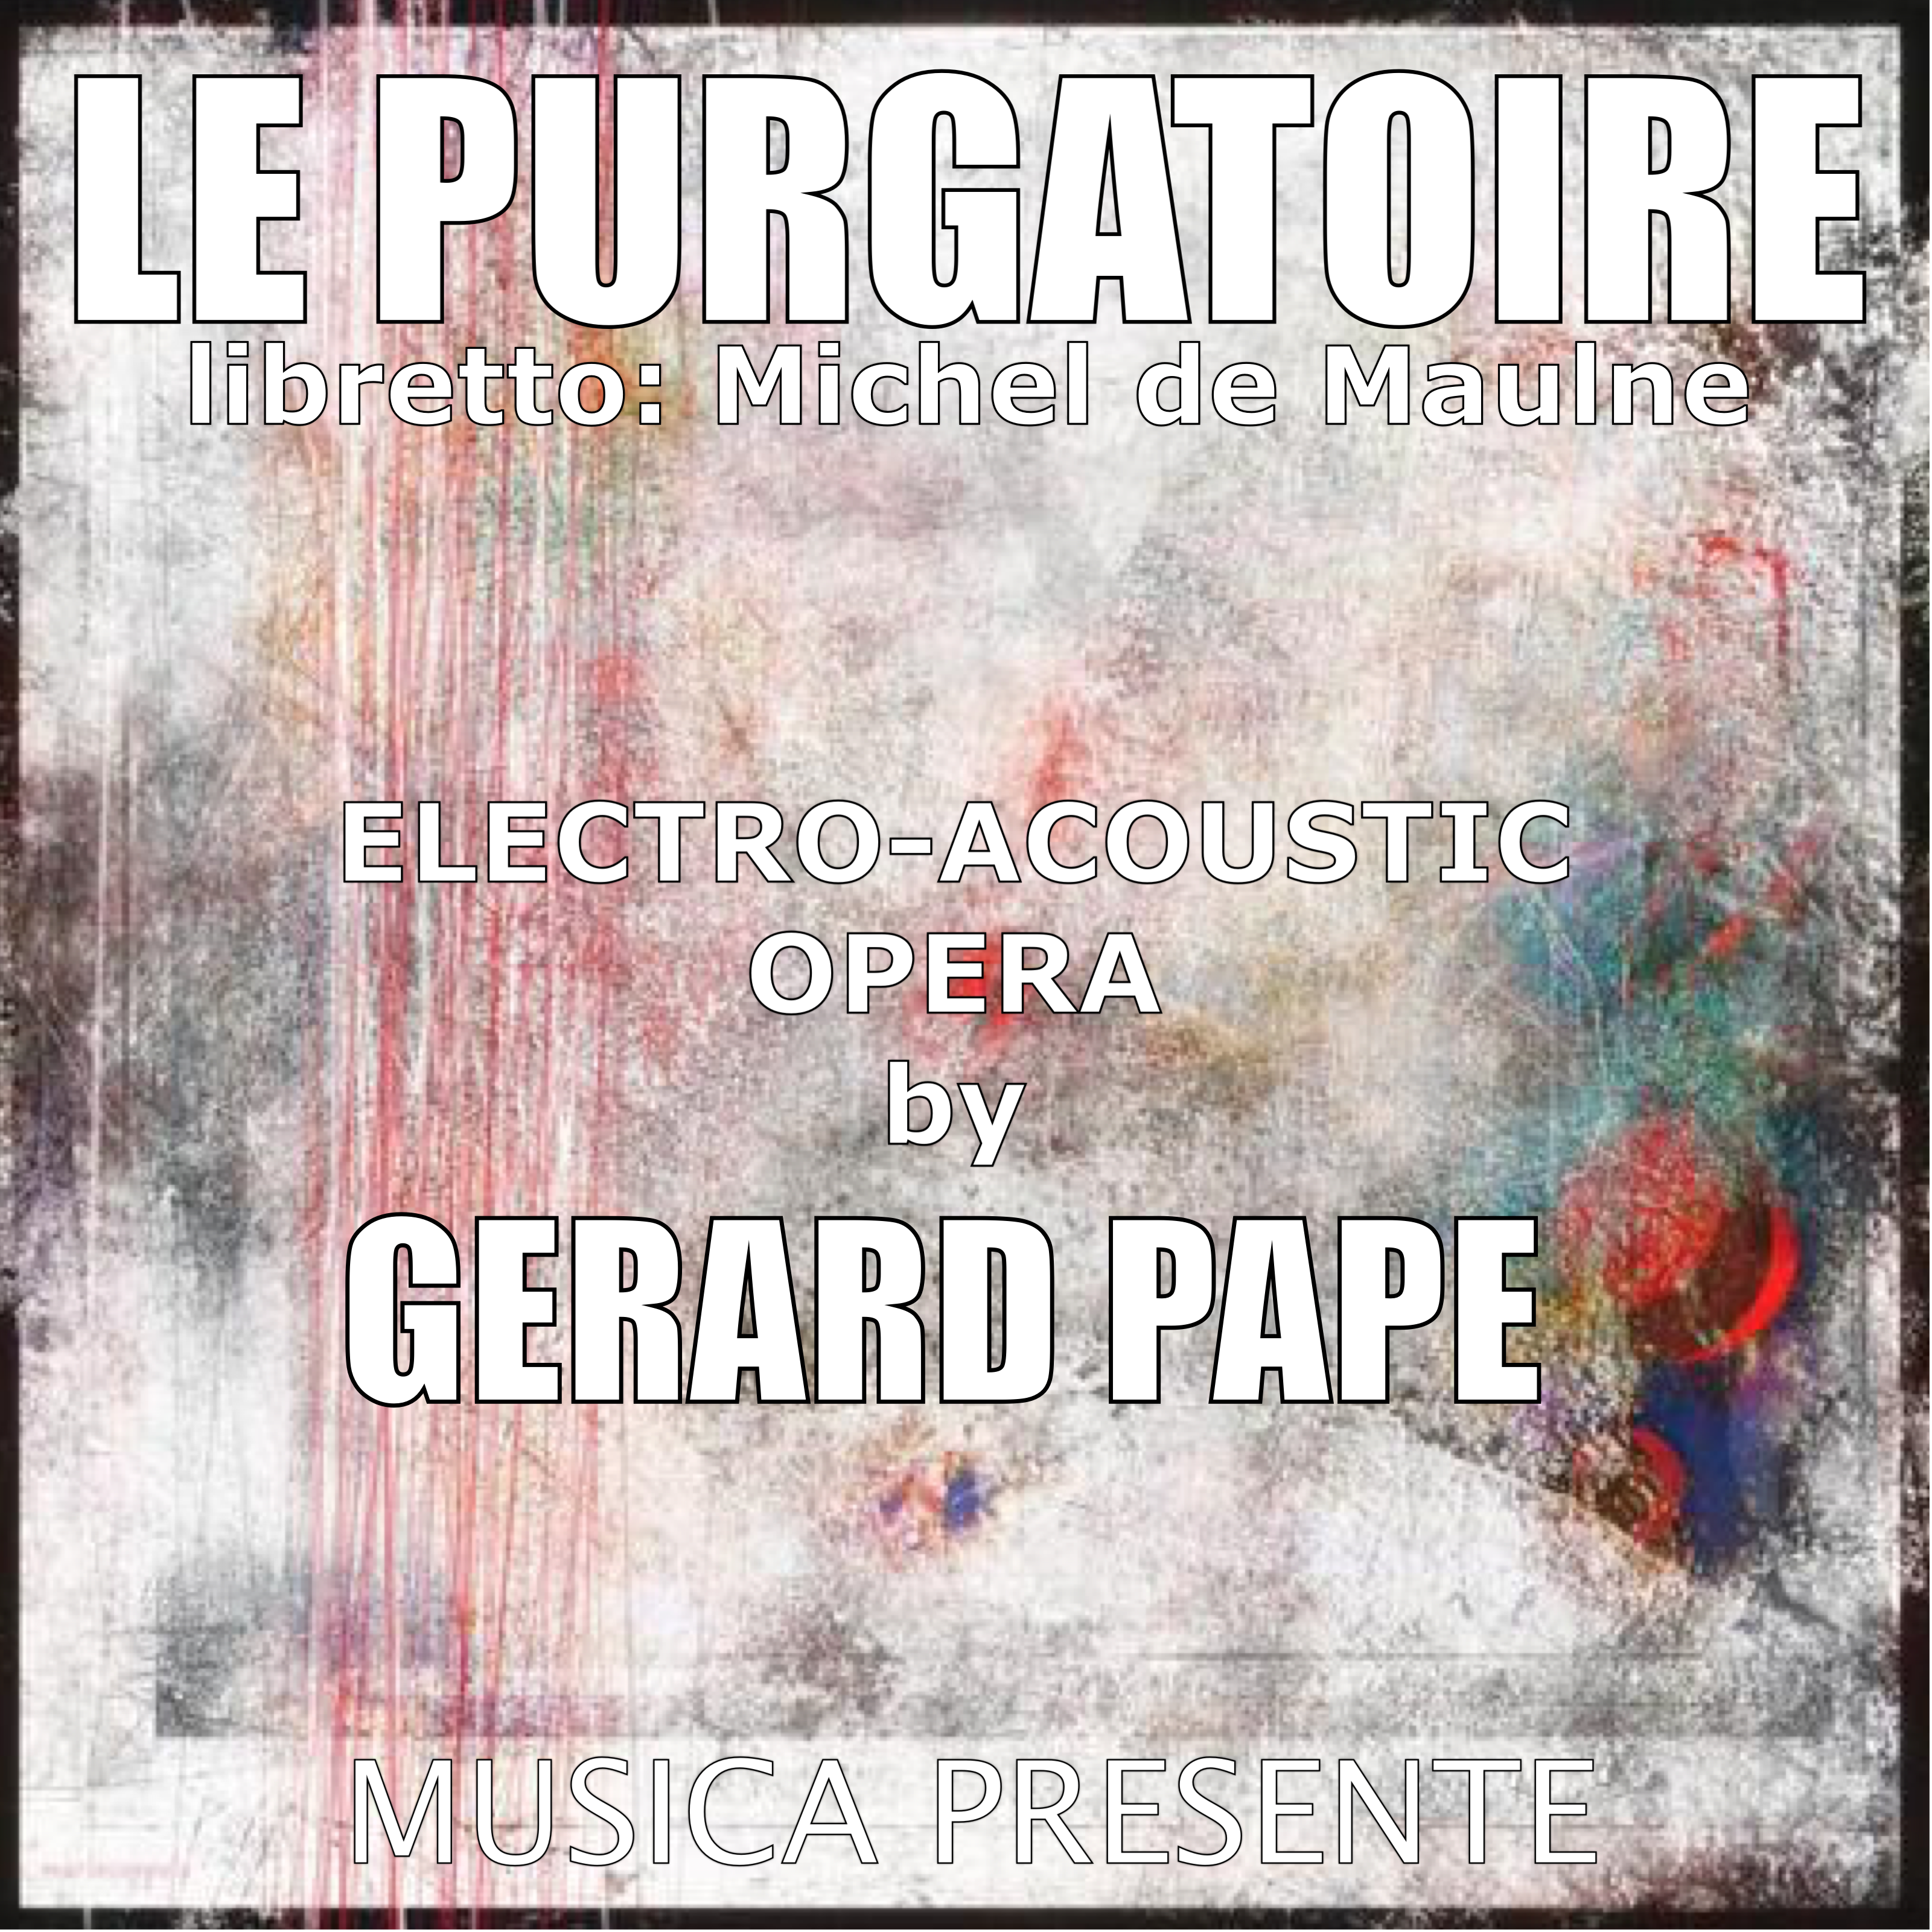 Gérard Pape and his new Opera: Le Purgatoire. An overwhelming Music Work.